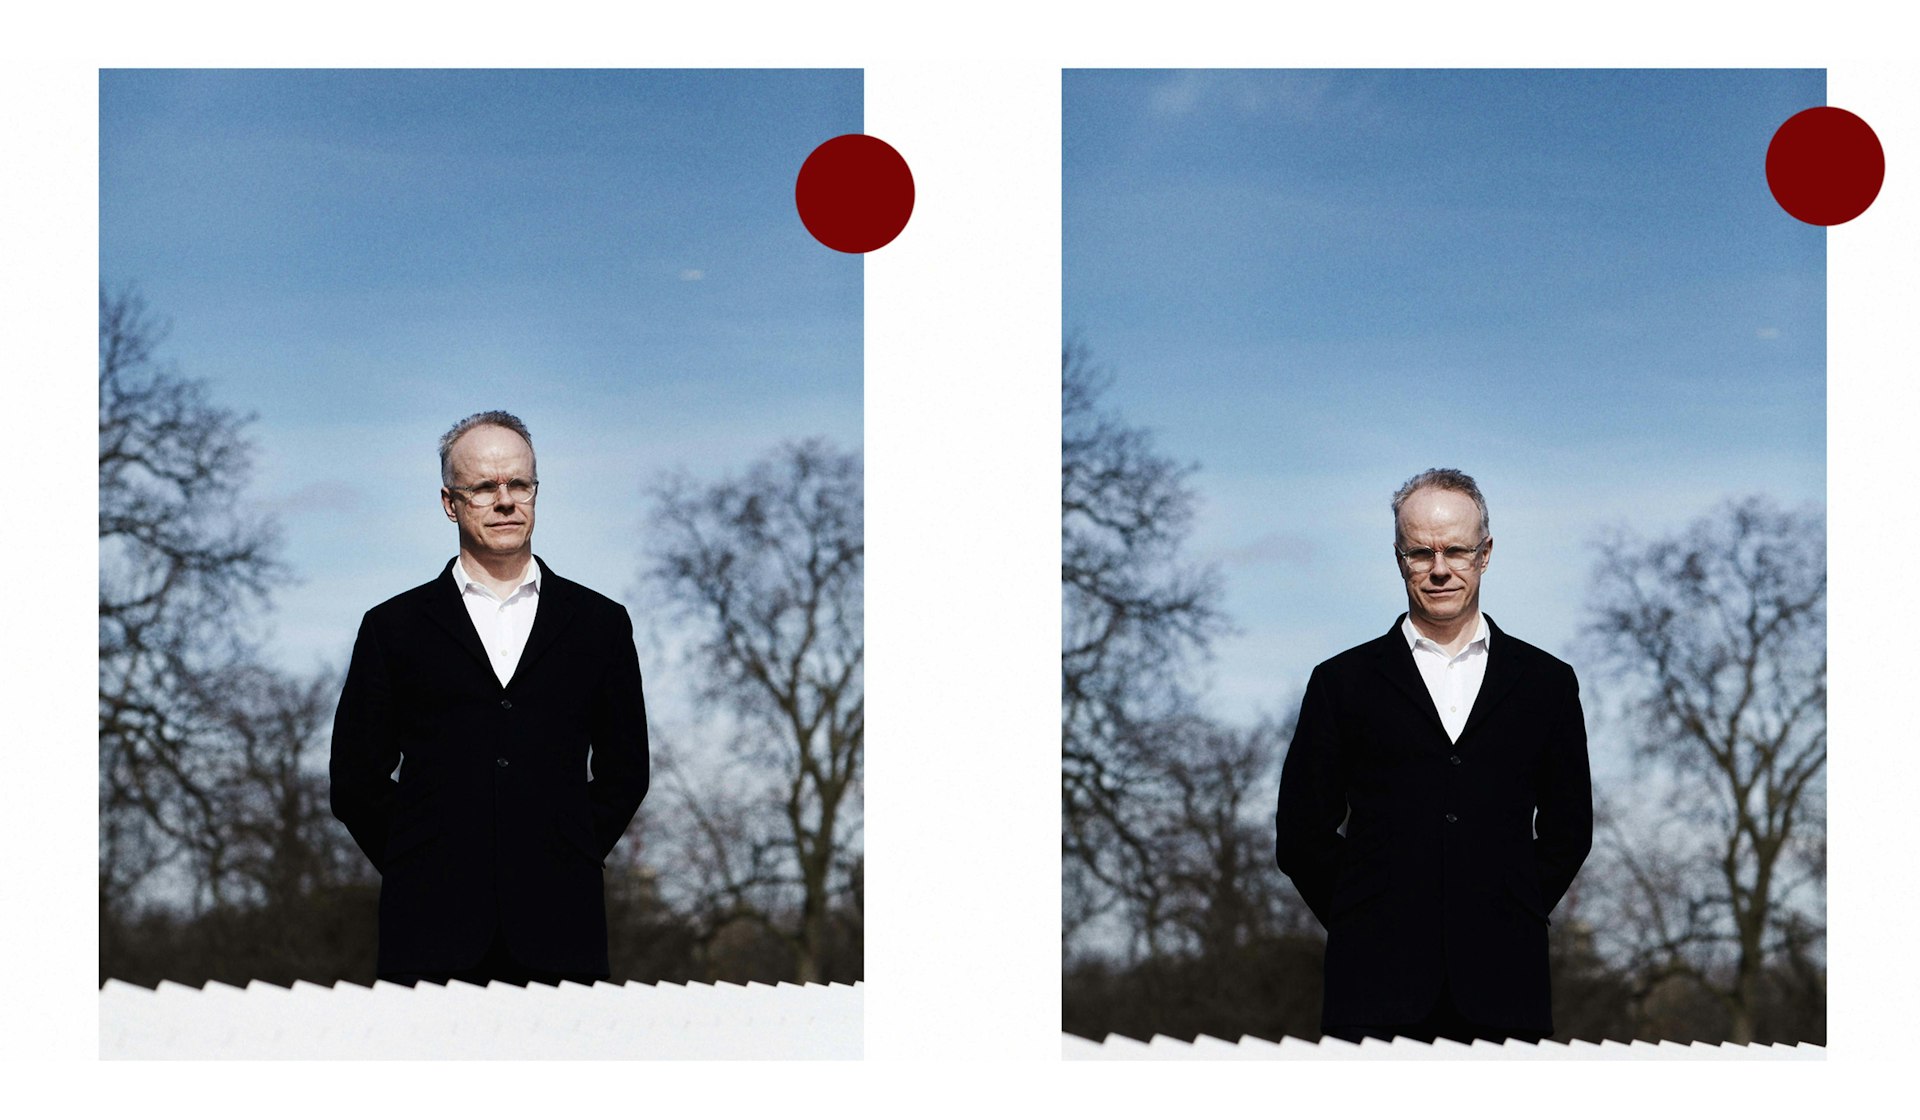 Curator and art historian Hans Ulrich Obrist has some advice about your address book